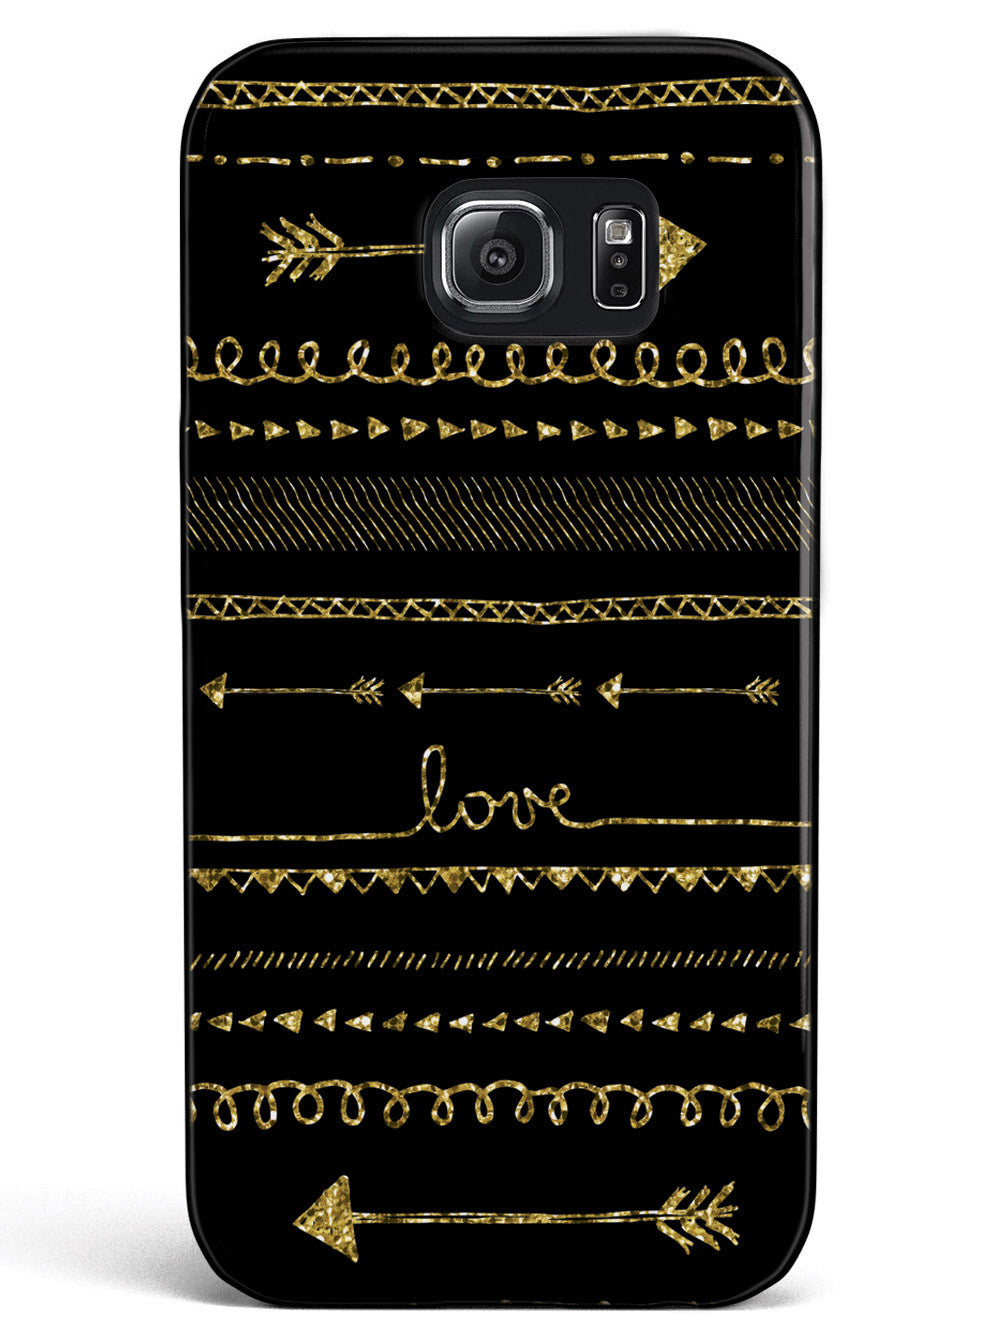 Gold Glitter Hand Drawn Doodle Arrows Case